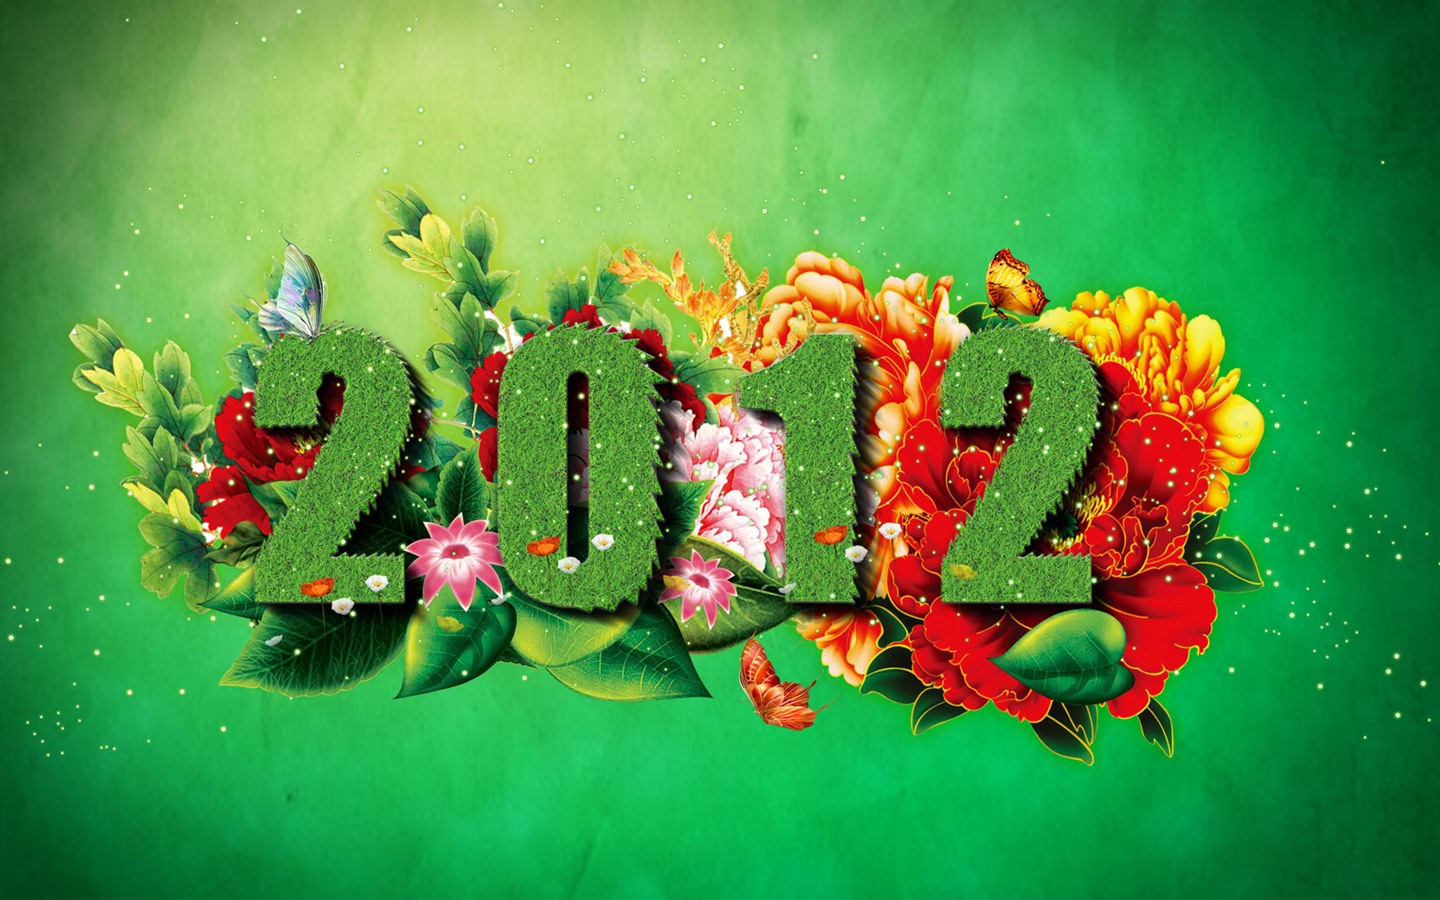 2012 New Year wallpapers (1) #19 - 1440x900